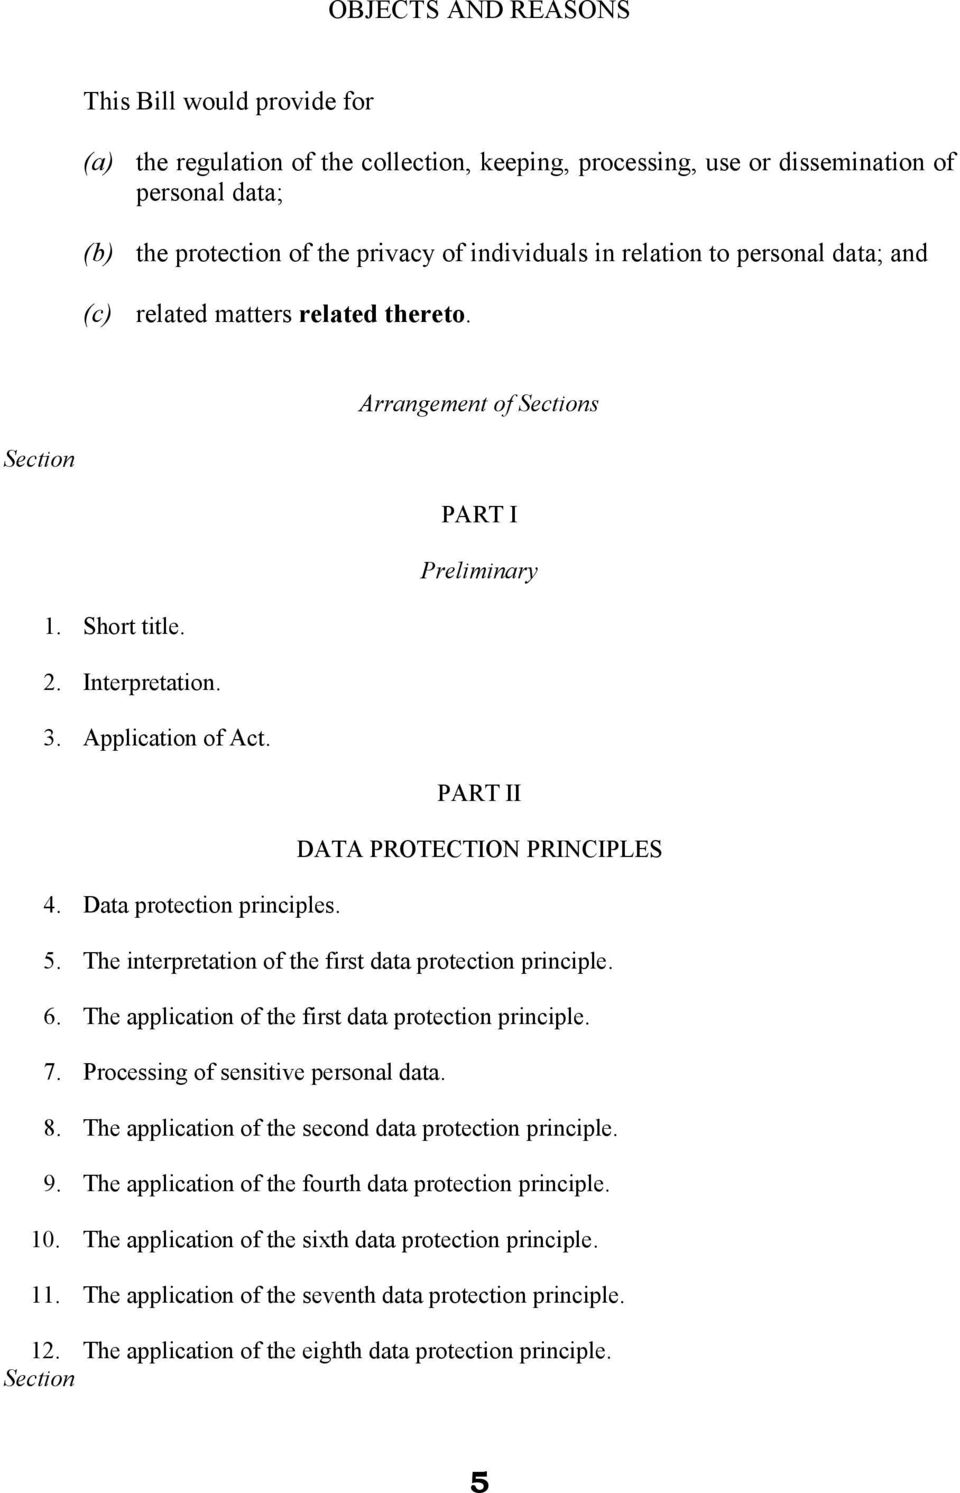 Data protection principles. PART II DATA PROTECTION PRINCIPLES 5. The interpretation of the first data protection principle. 6. The application of the first data protection principle. 7.